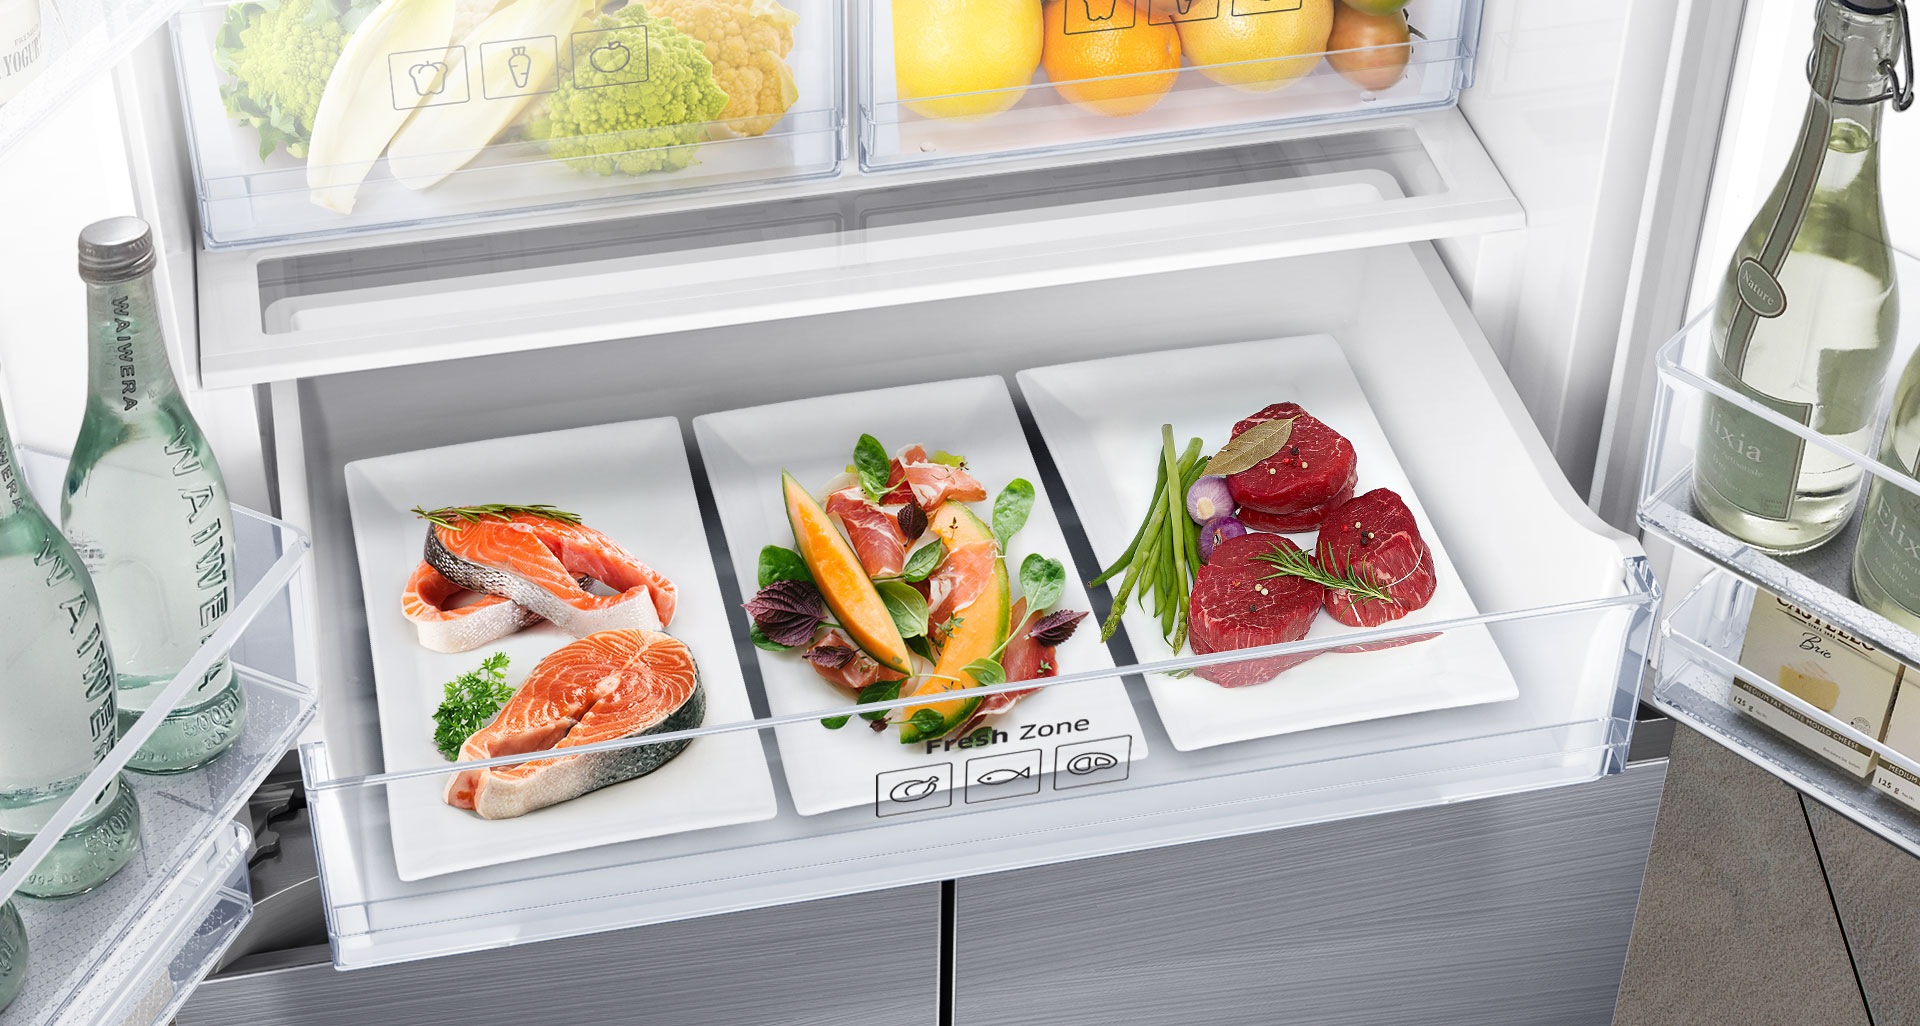 Samsung French Door Refrigerator with Fresh Zone for Meat & Fish Preservation